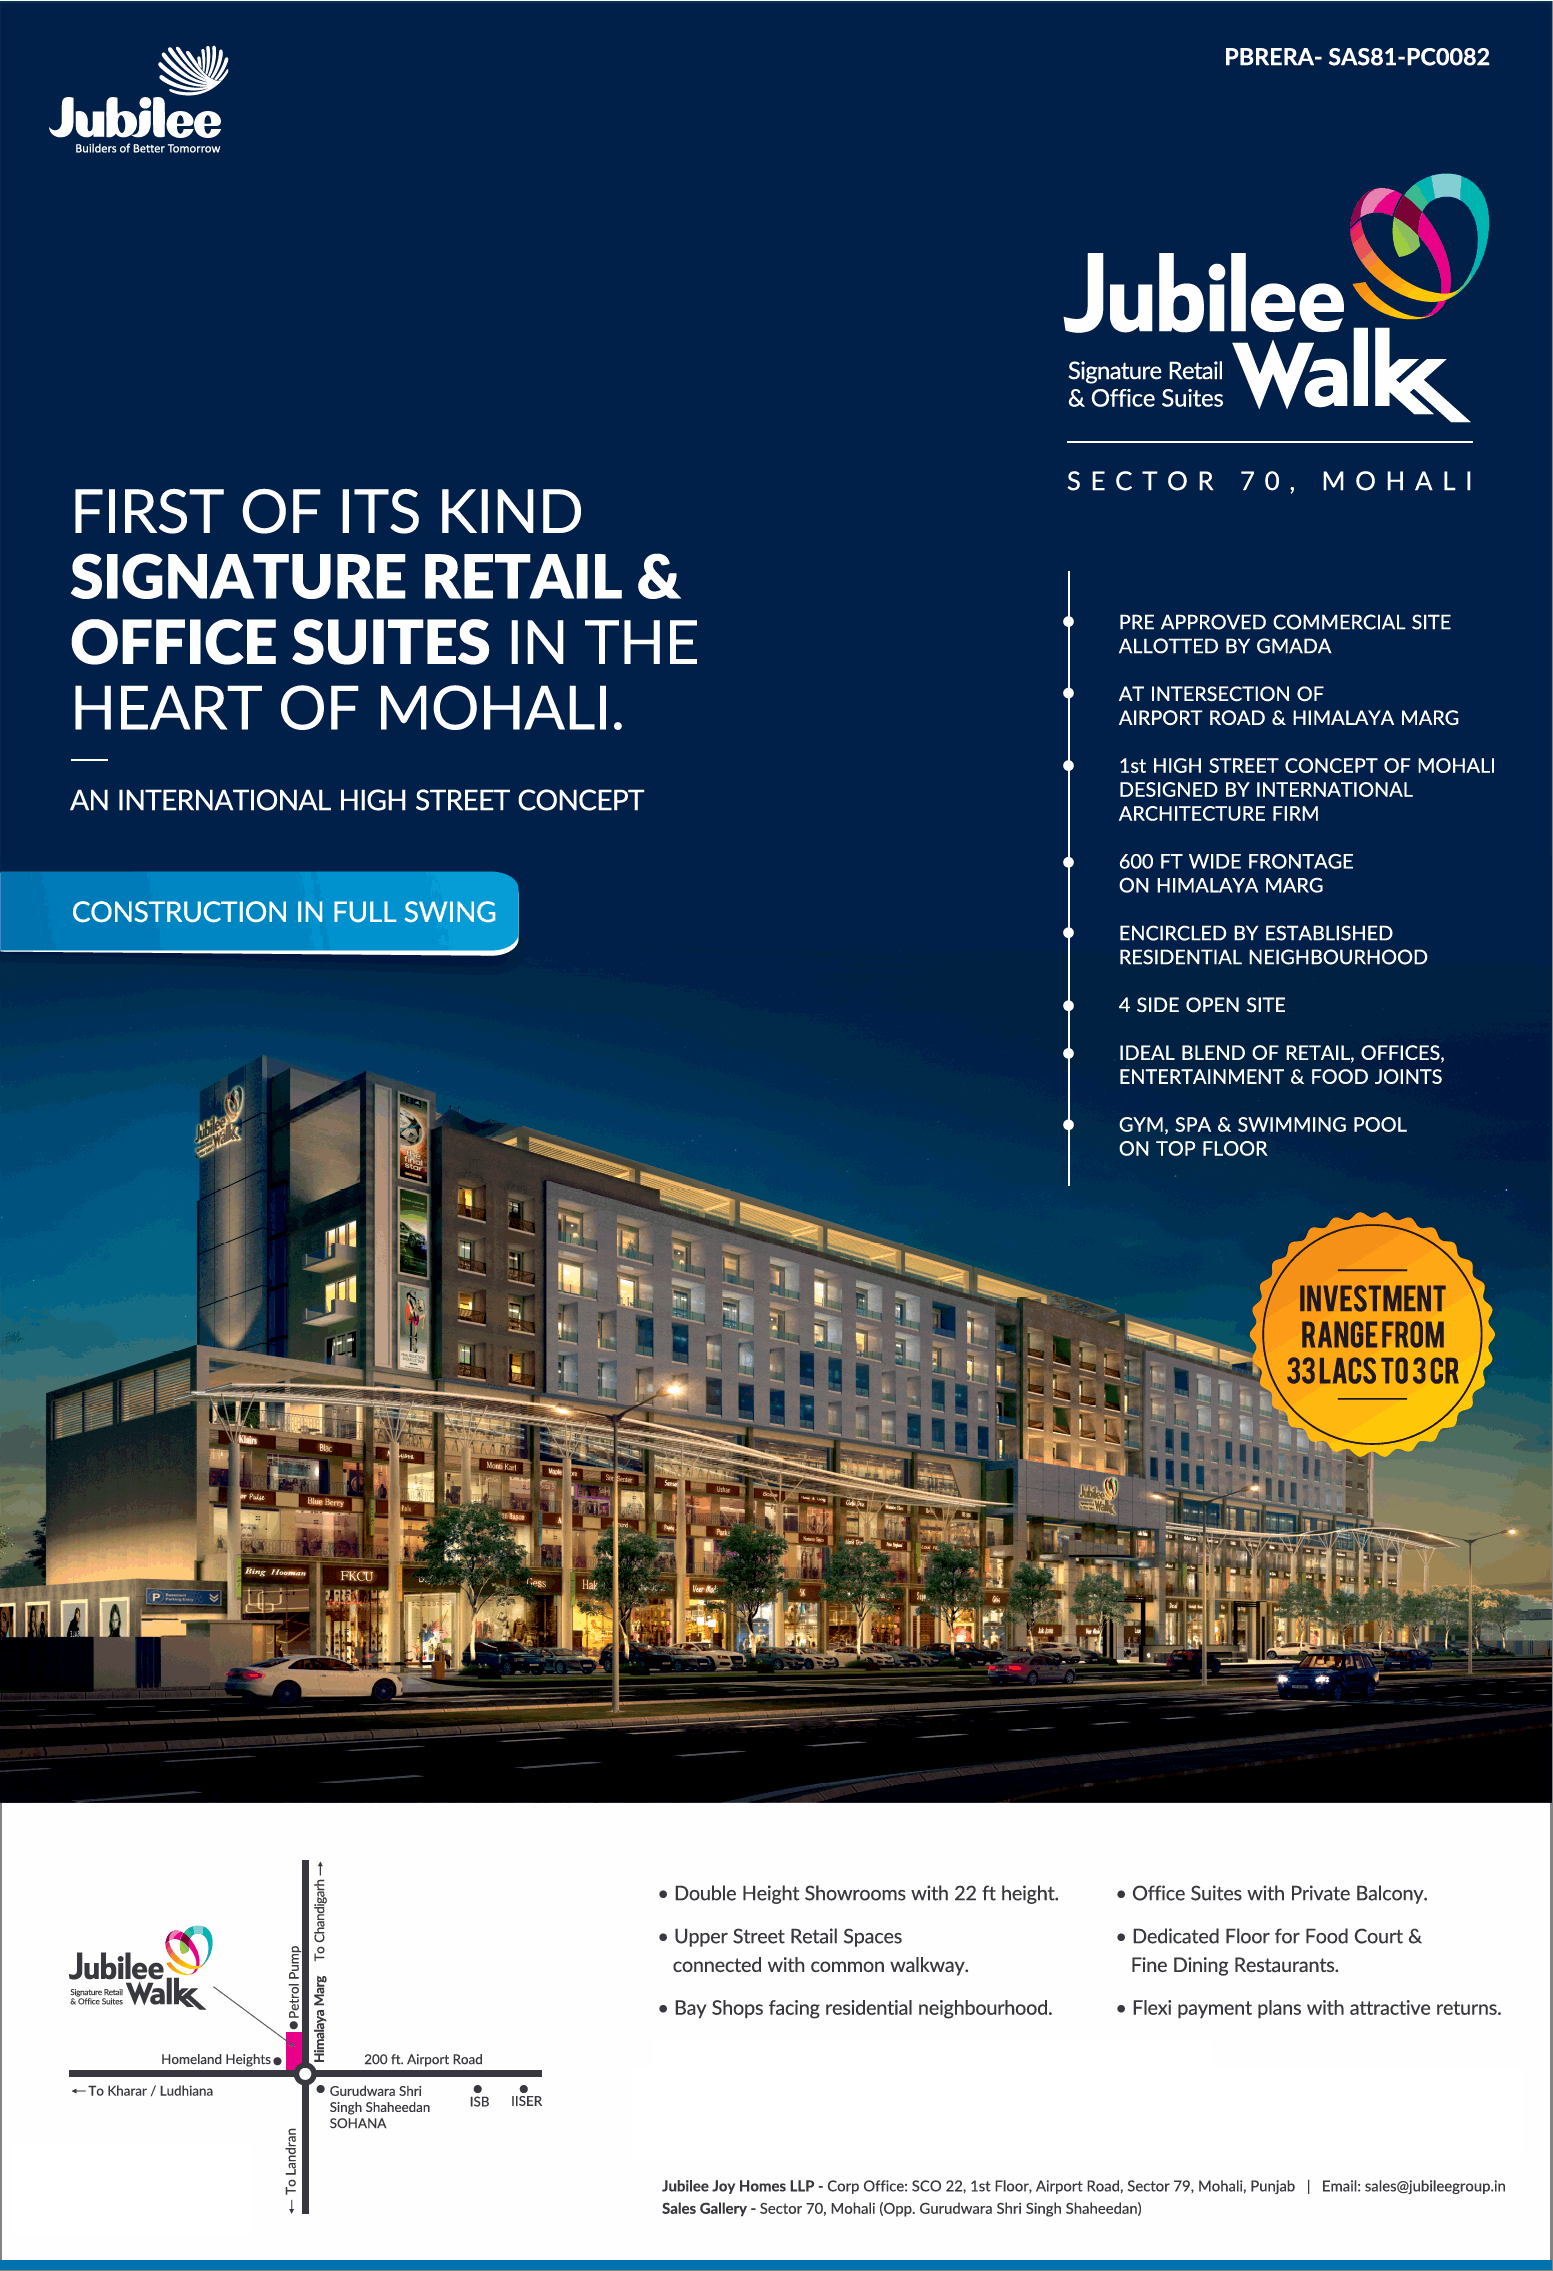 Signature retail and office suites at Jubilee Walk, Mohali